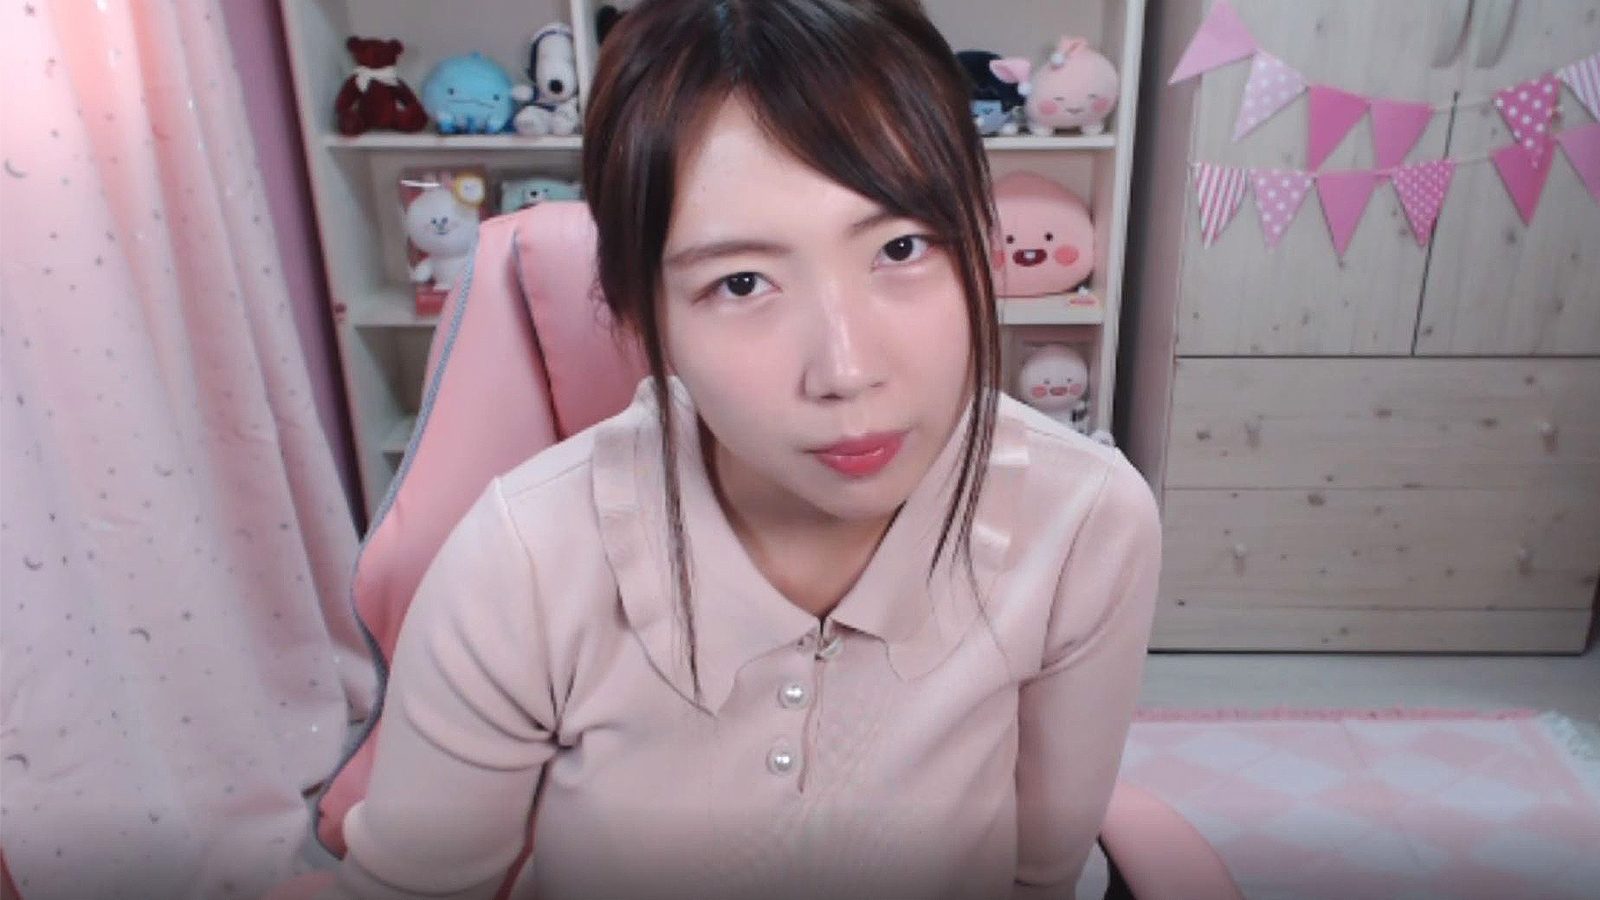 Twitch streamer pledges to try and get banned every day until Korea  shutdown - Dexerto